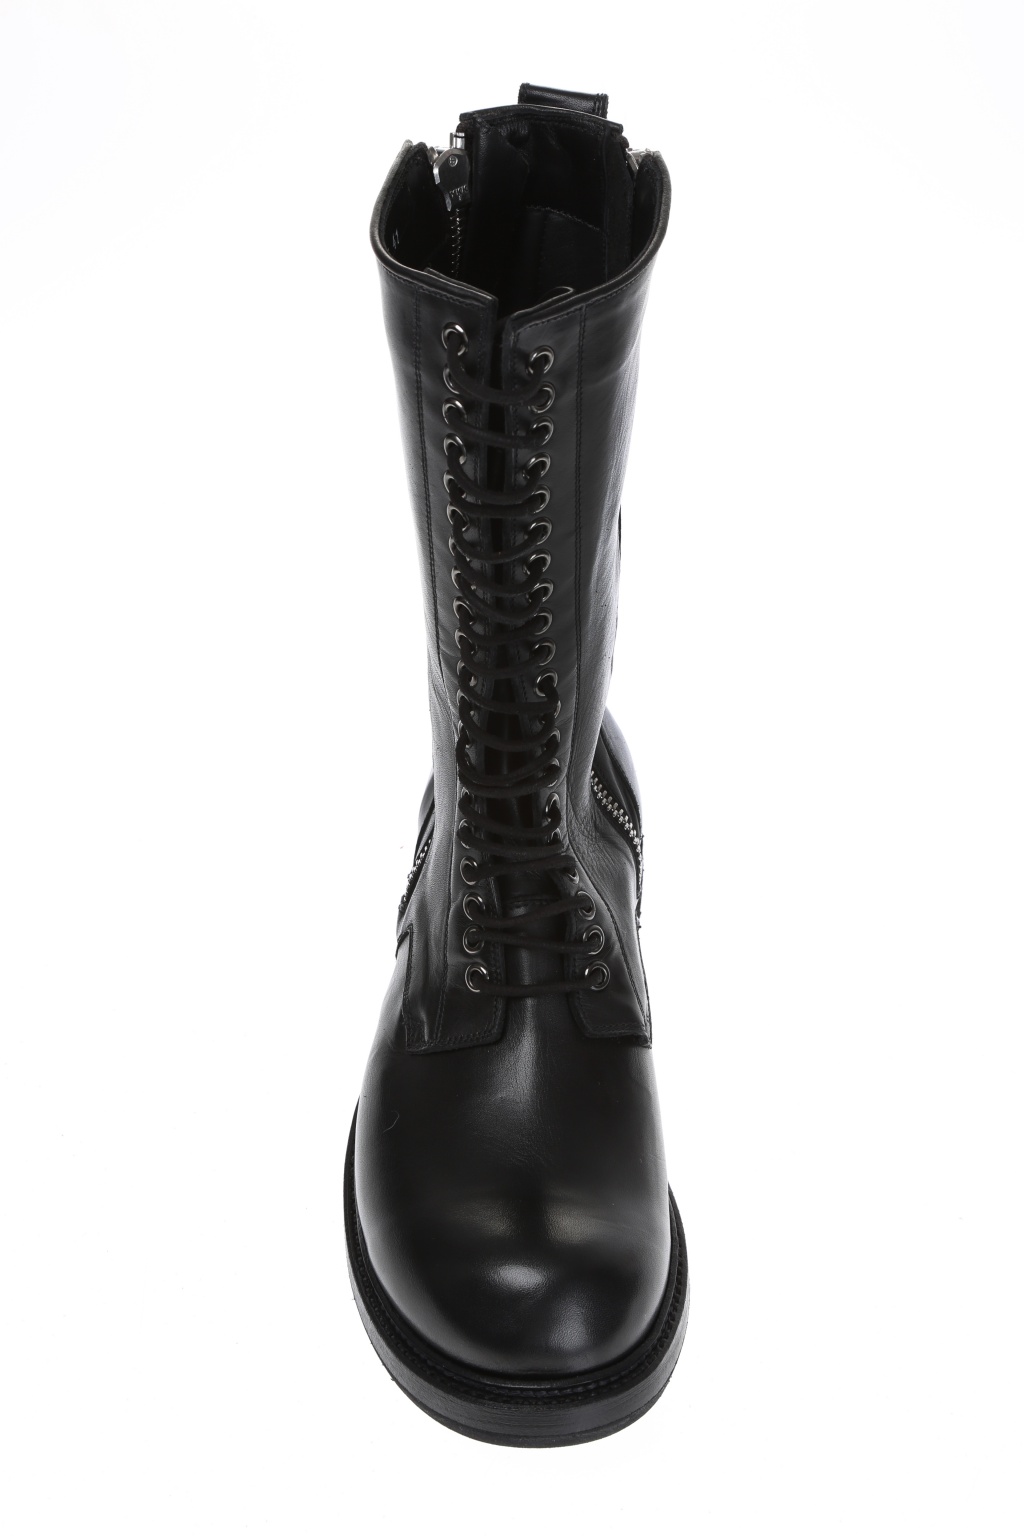 leather boots calf length